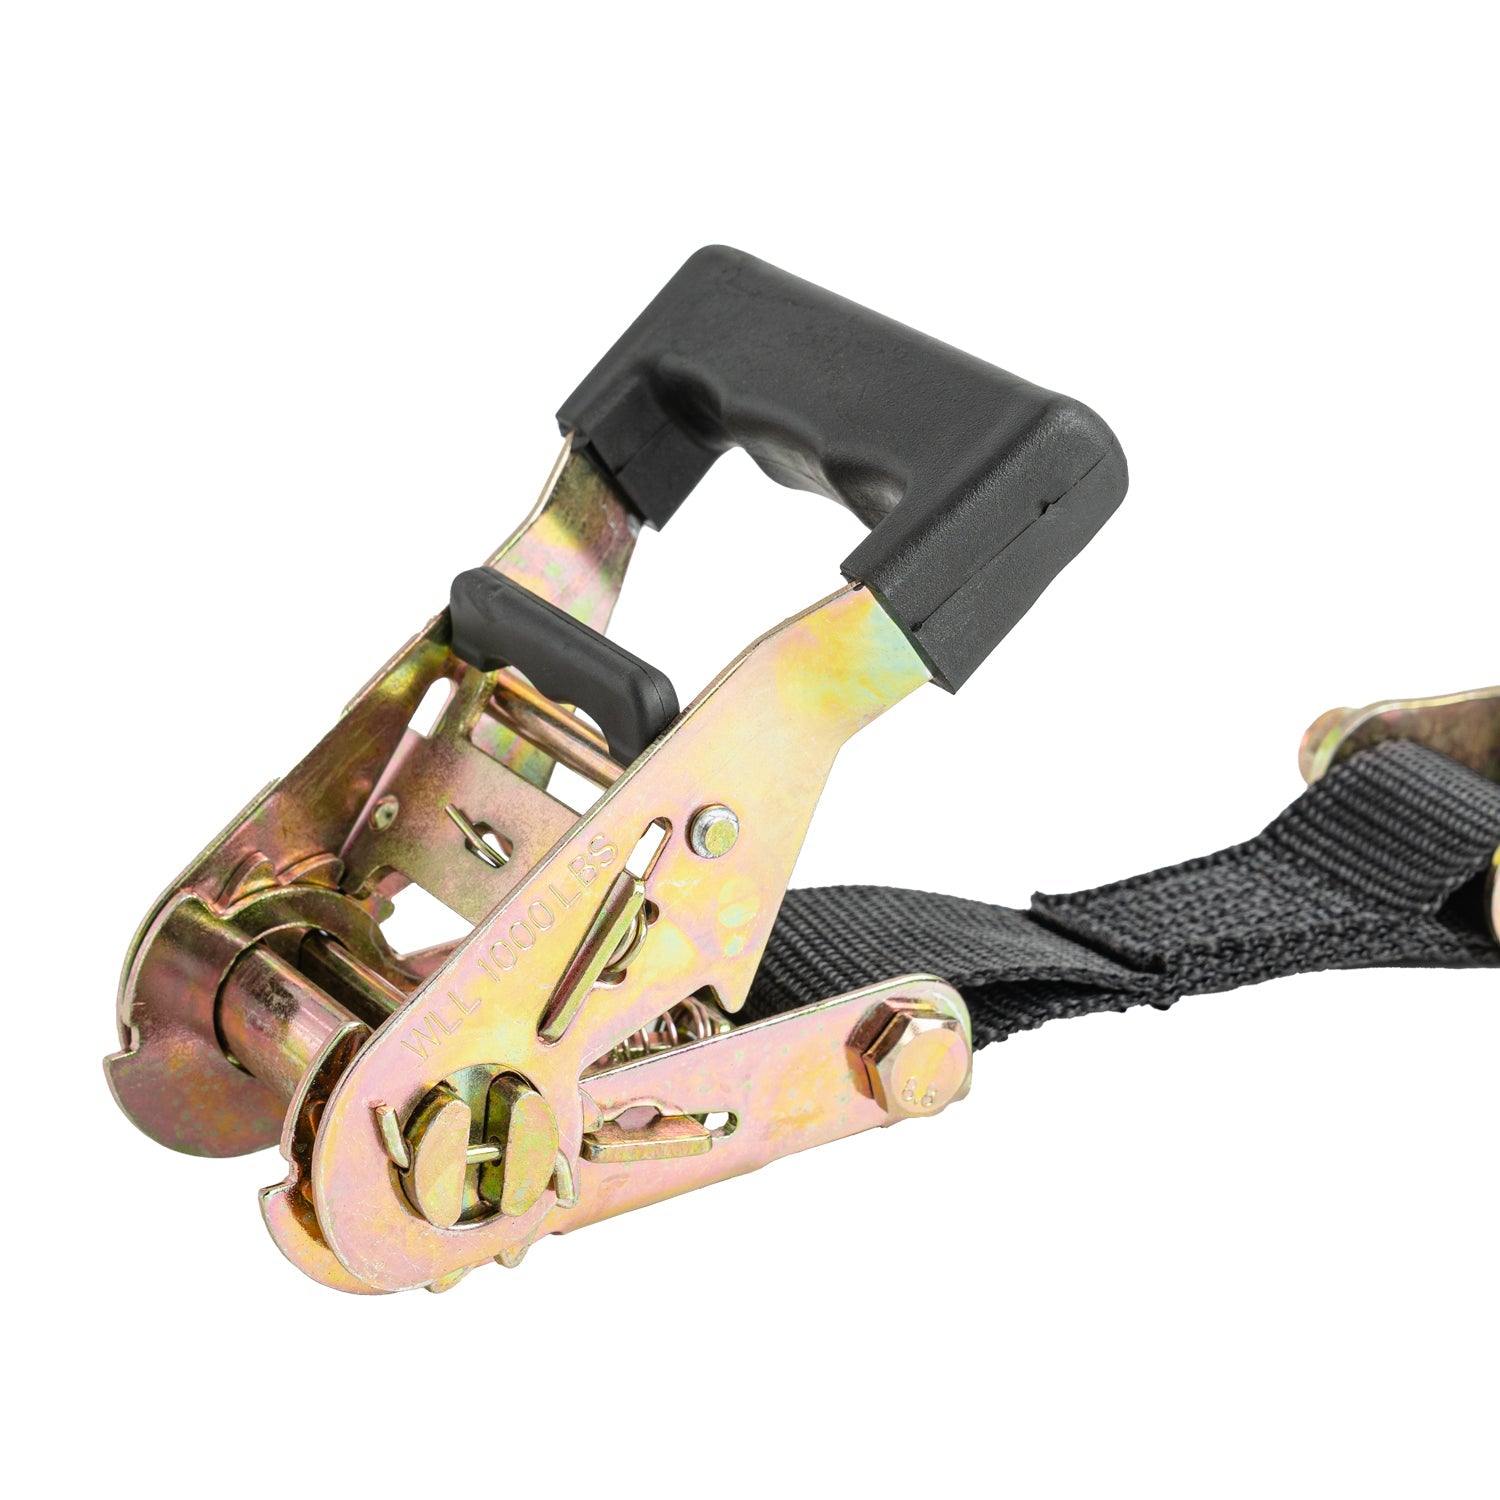 https://www.theperfectbungee.com/cdn/shop/products/15ft-x-15in-shockstrap-ratchet-strap-1k-wllshockstrapthe-perfect-bungee-shockstrap-tie-downs-108301.jpg?v=1699285731&width=1500